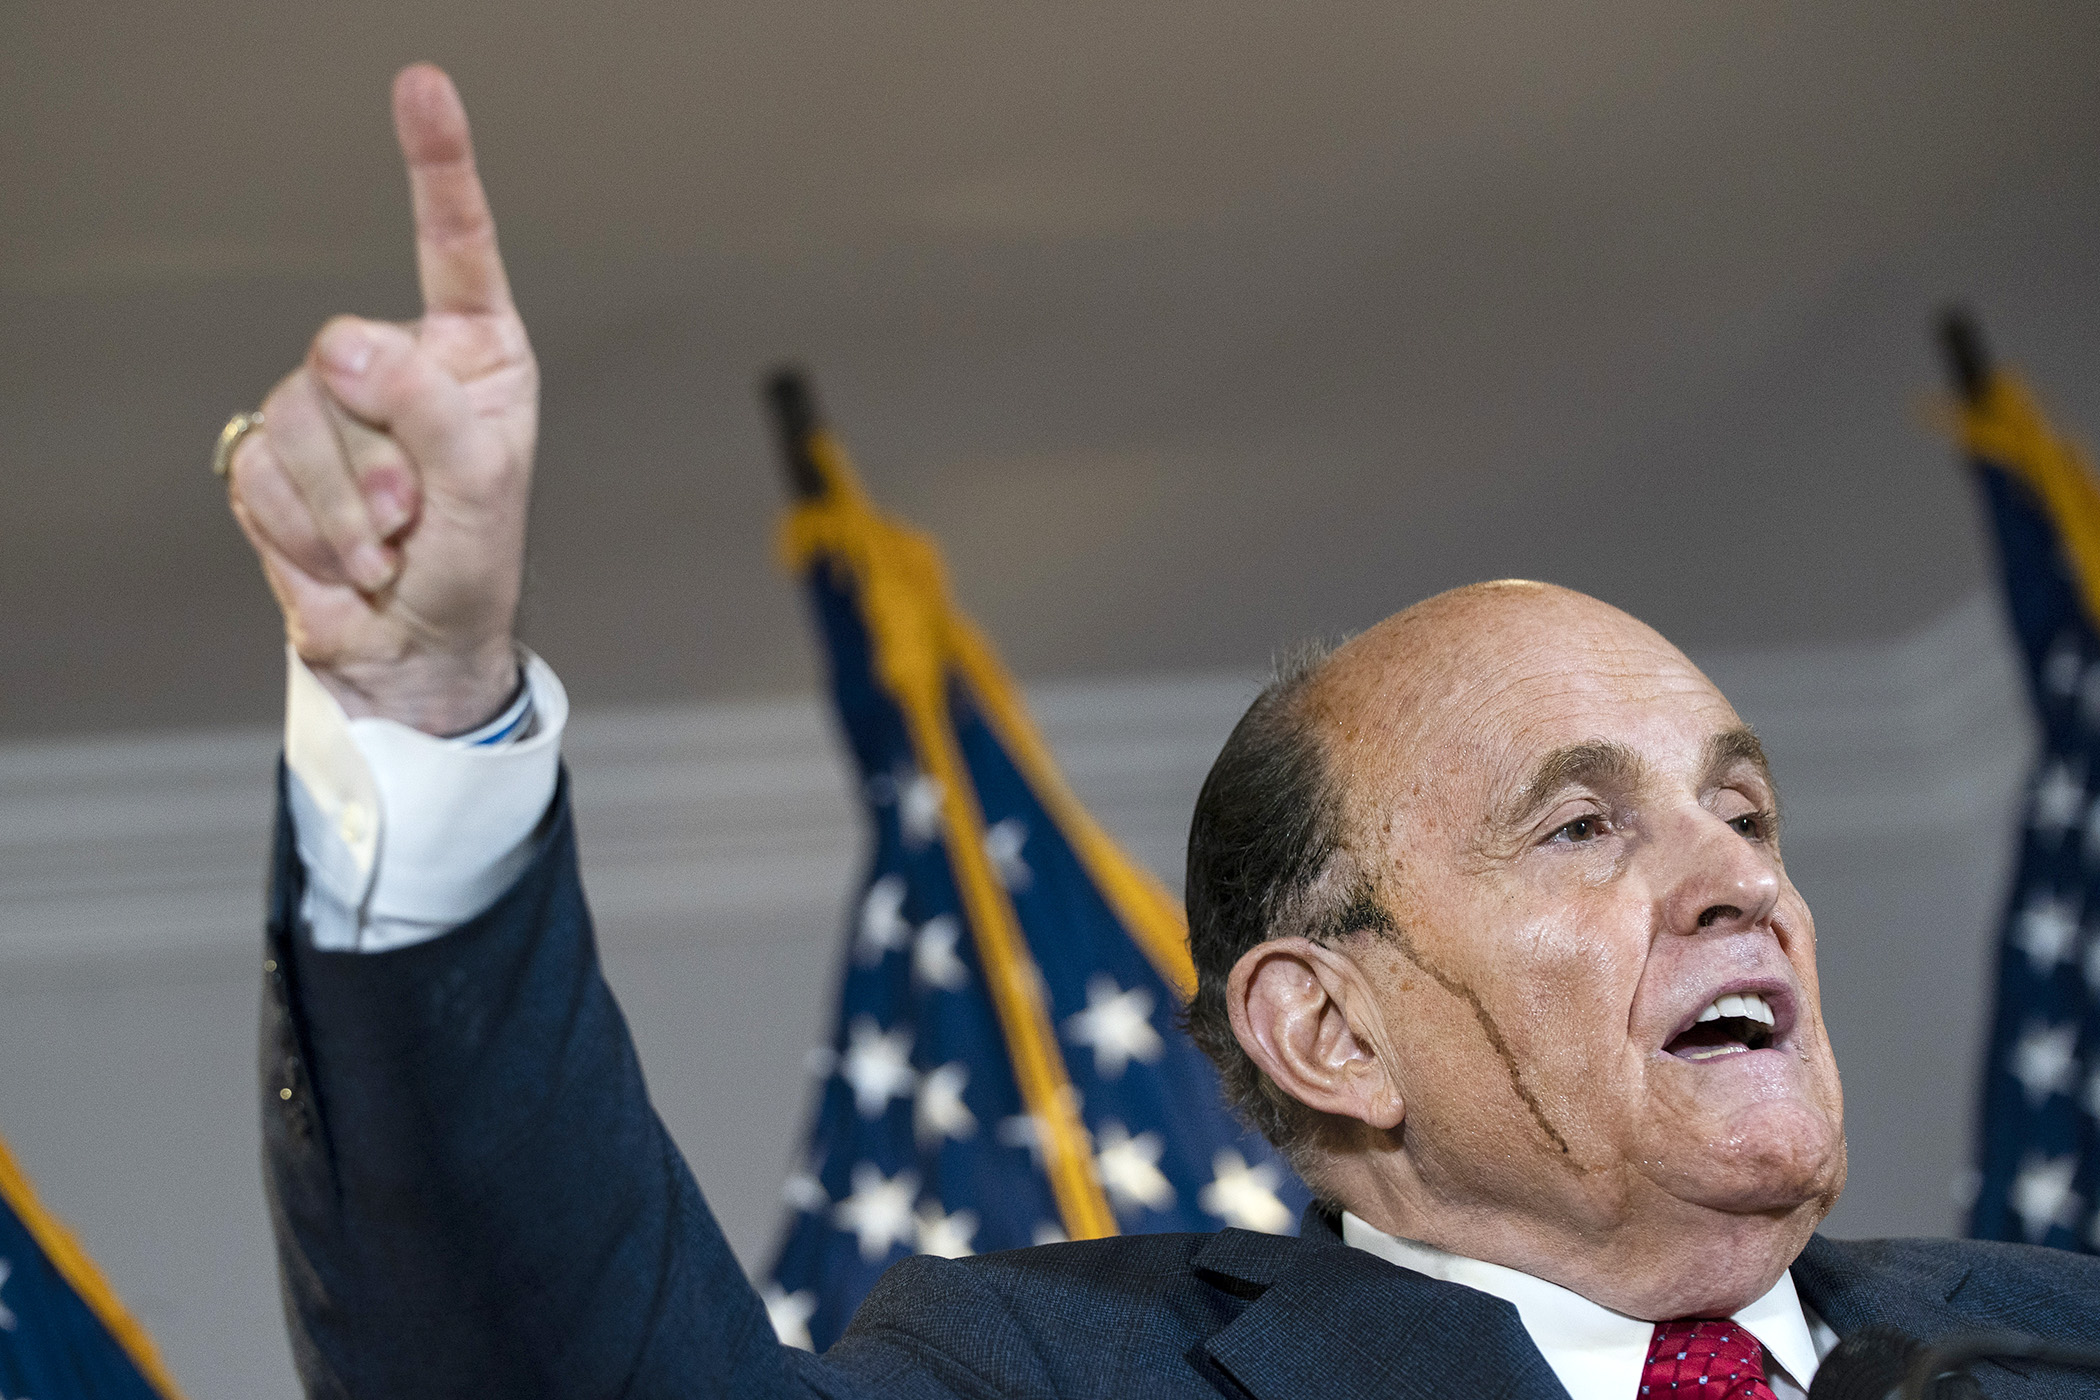 PHOTO: Rudy Giuliani speaks to the press about various lawsuits related to the 2020 election, inside the Republican National Committee headquarters in Washington, Nov. 19, 2020.